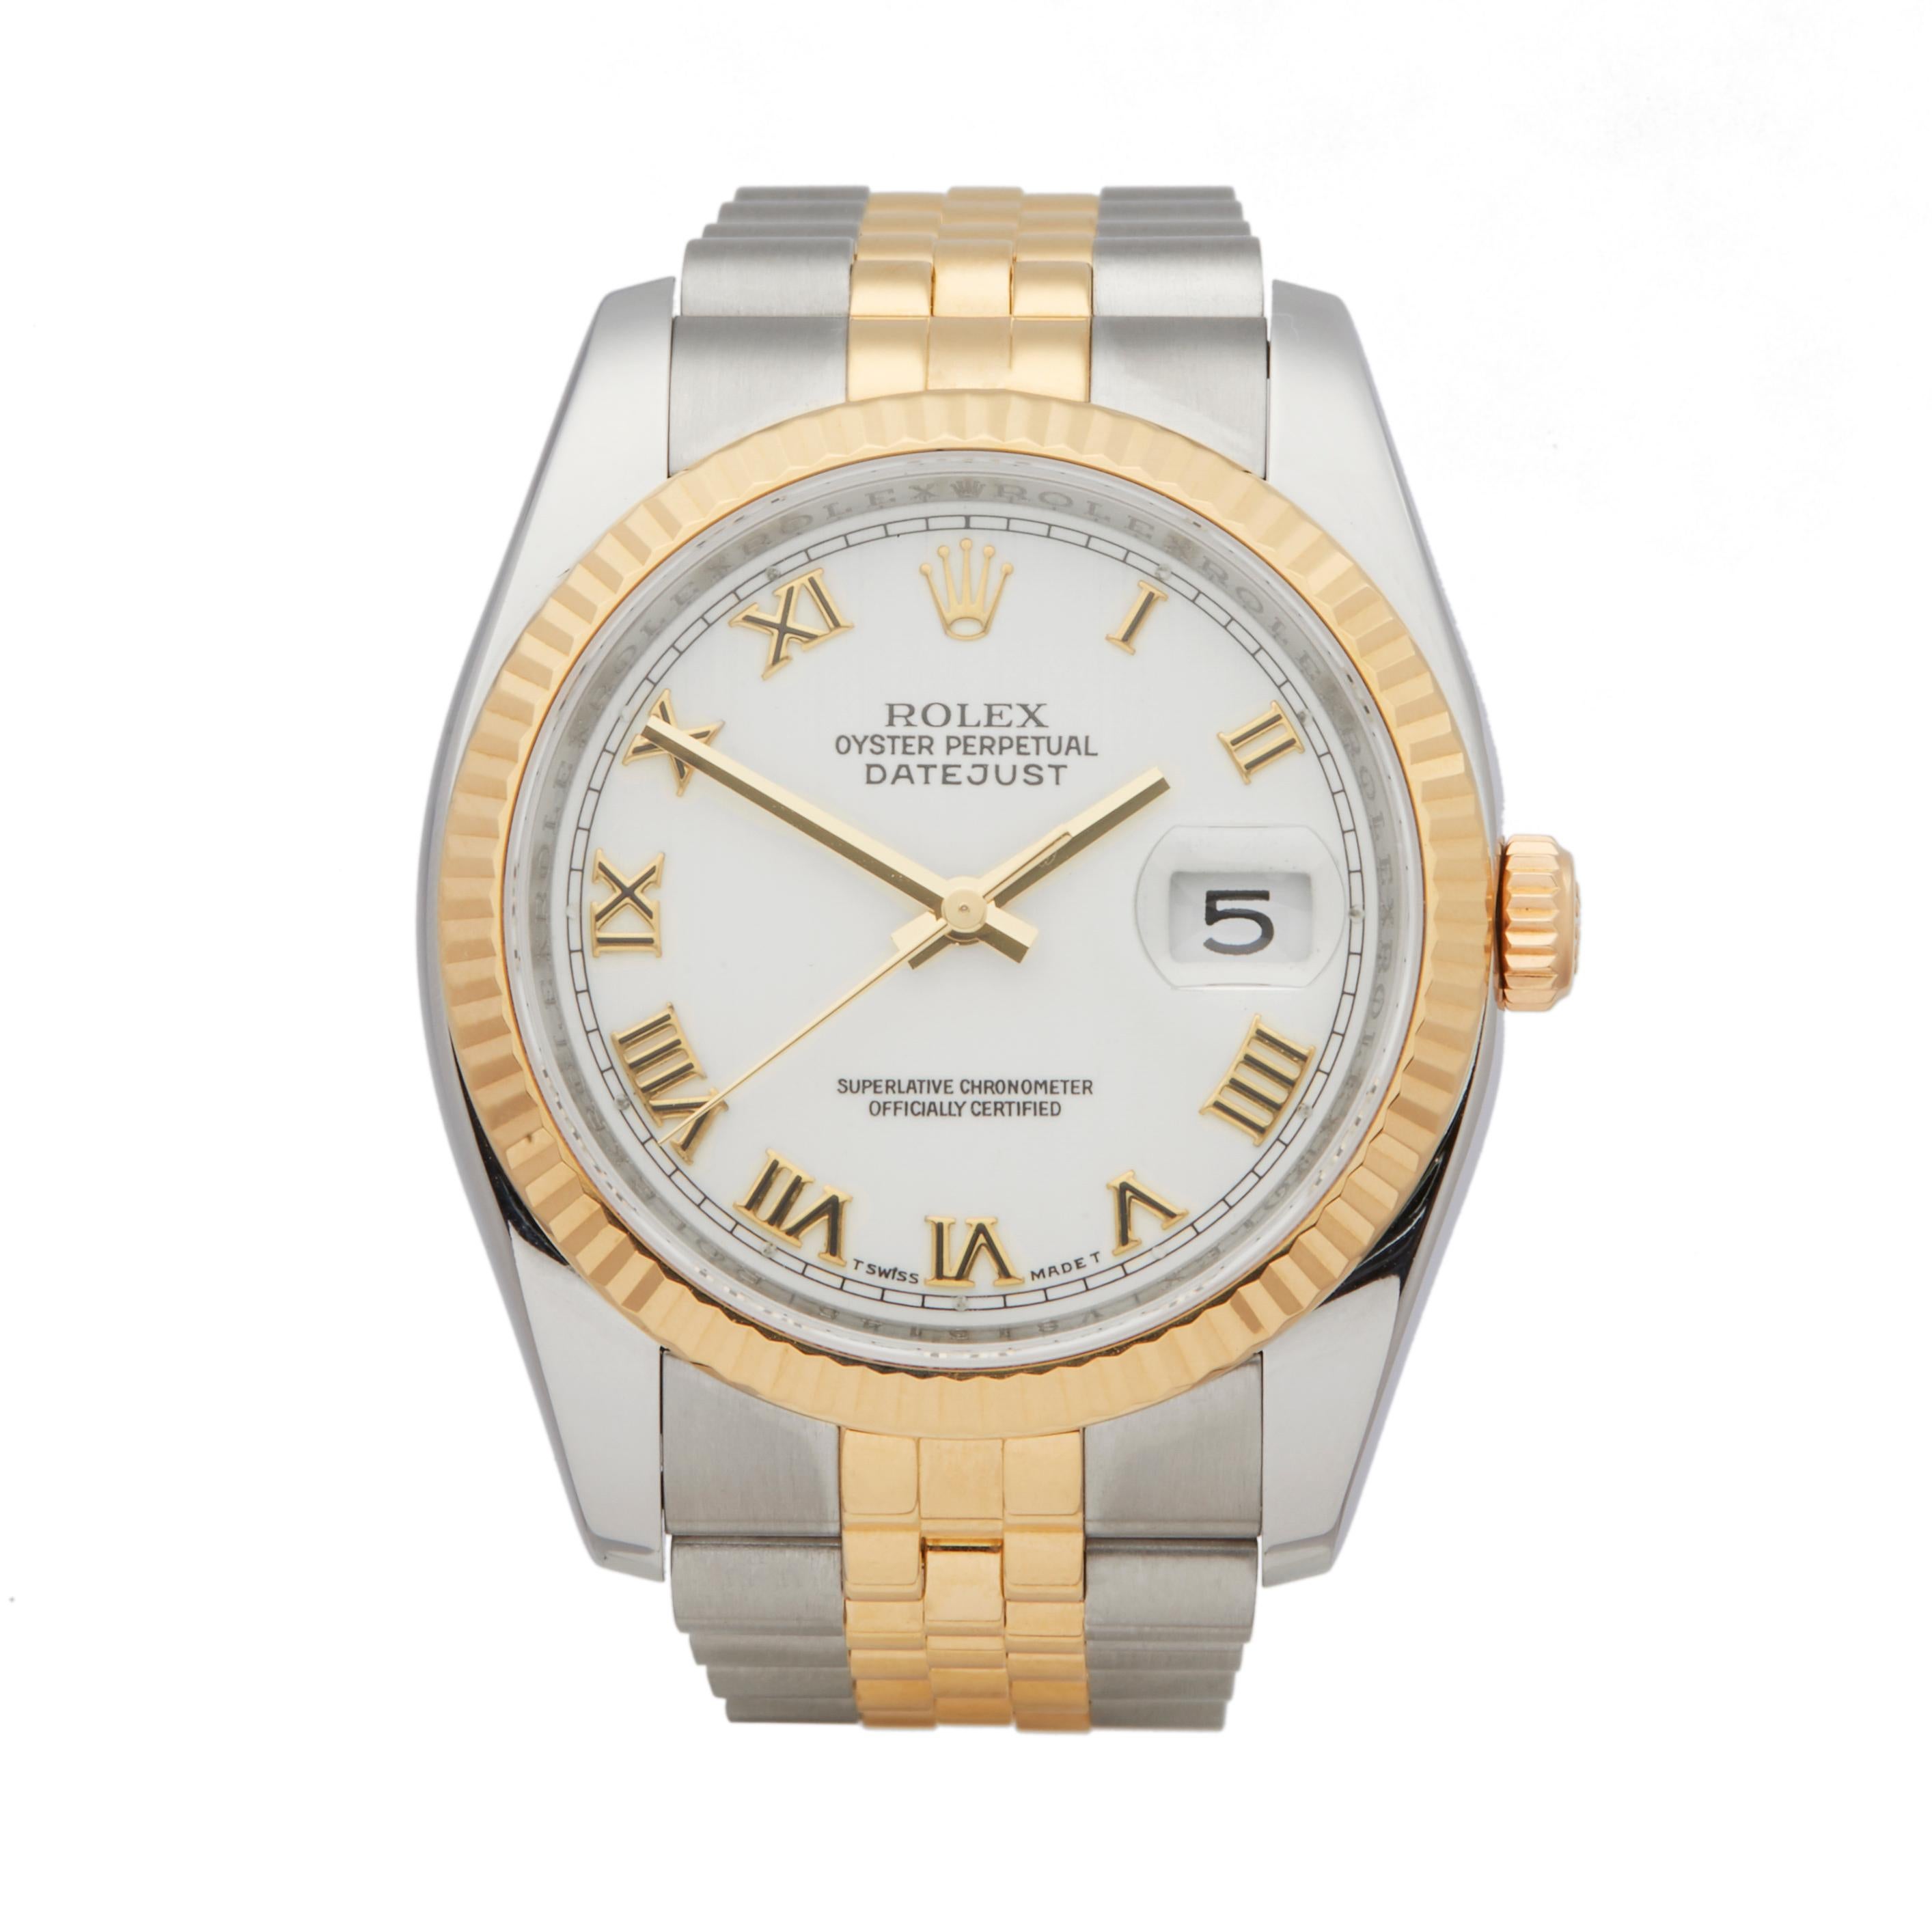 Rolex Datejust Stainless Steel and 18 Karat Yellow Gold 116233